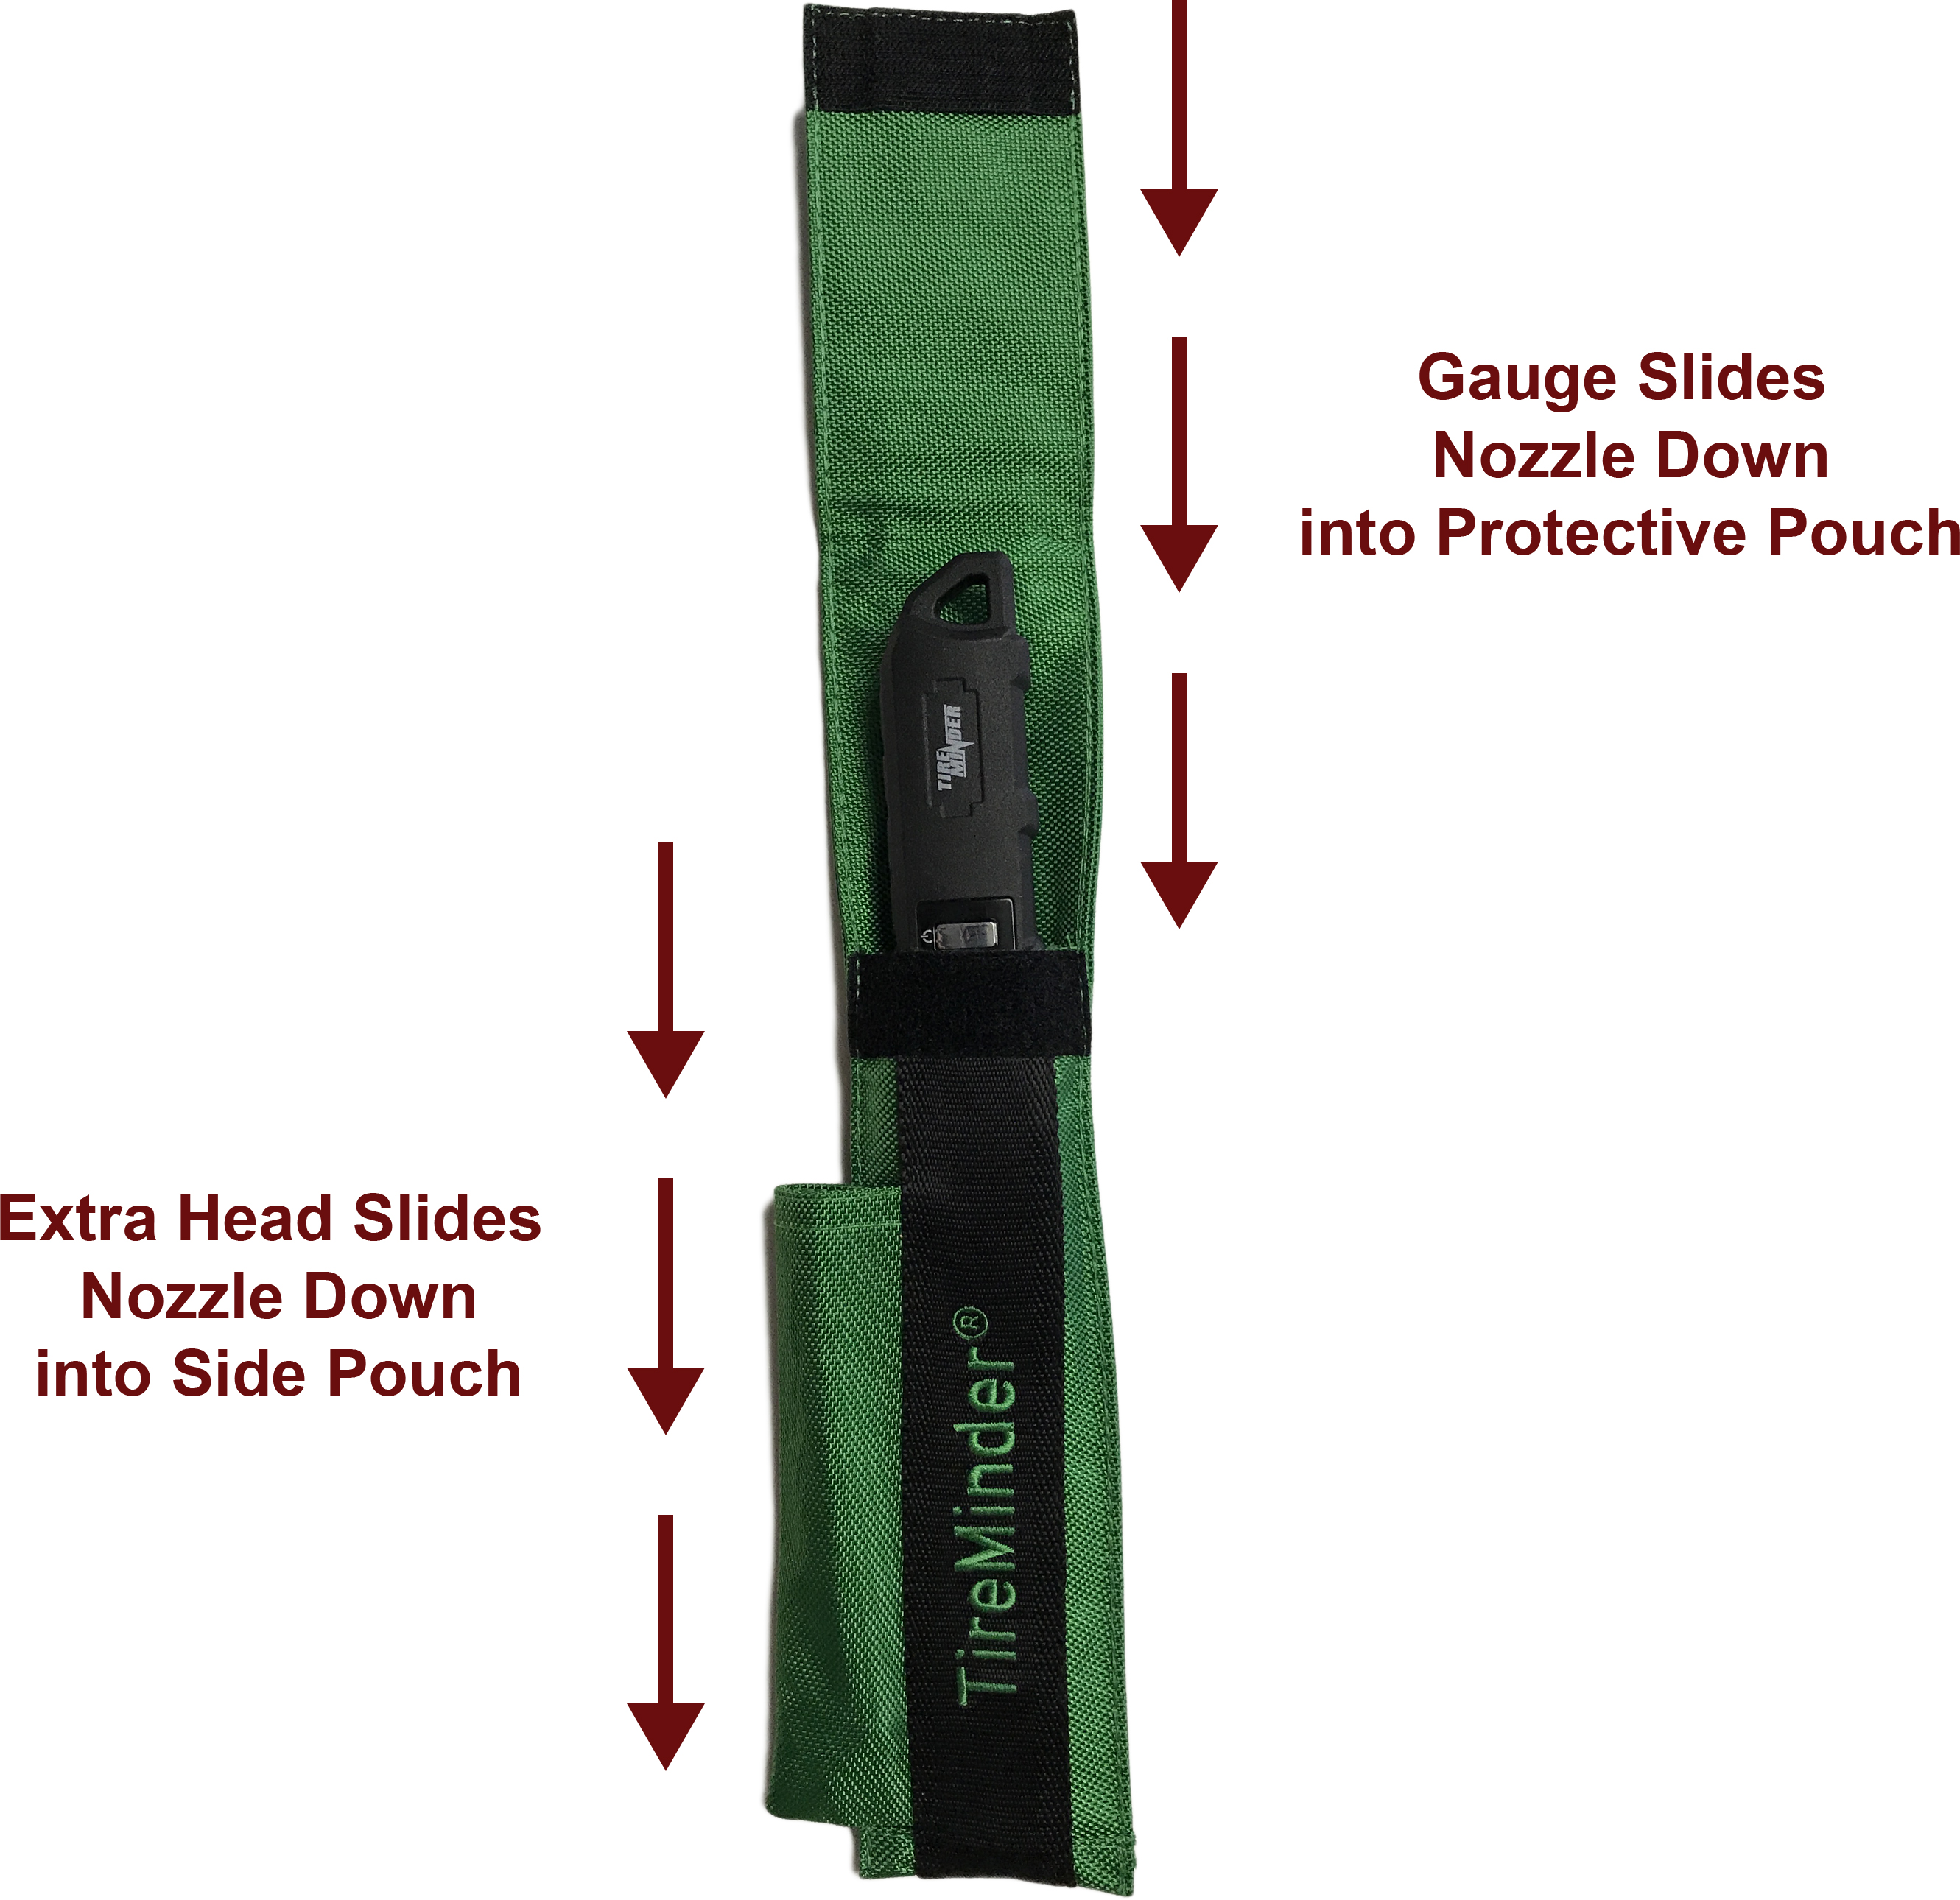 https://www.minderresearch.com/wp-content/uploads/content/updated-pouch-instructions.jpg